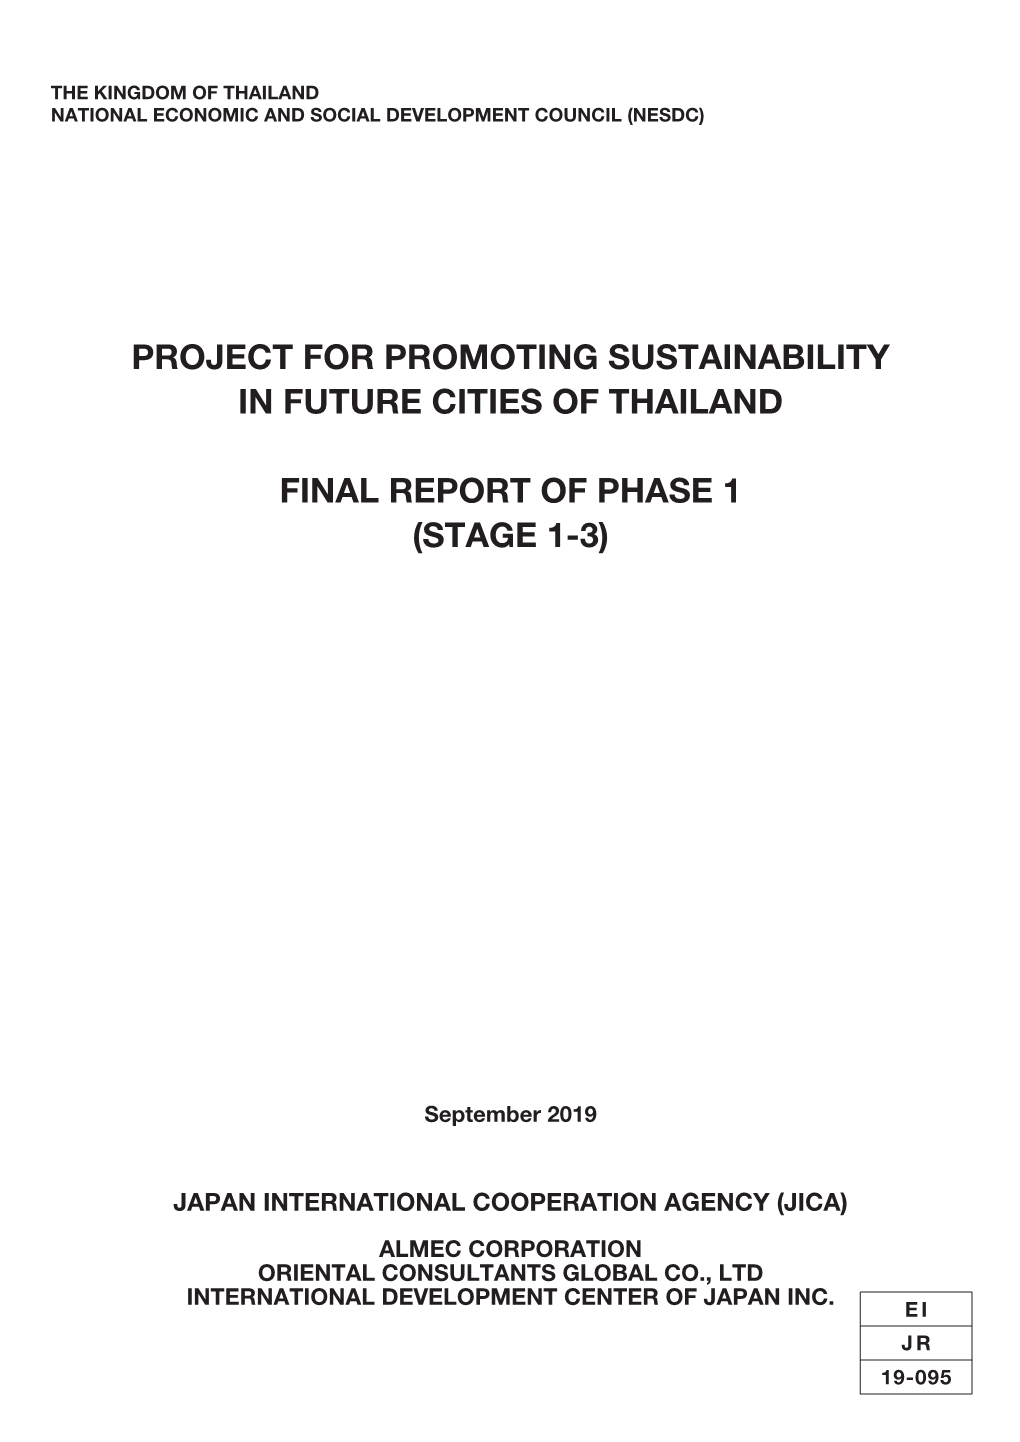 Project for Promoting Sustainability in Future Cities of Thailand